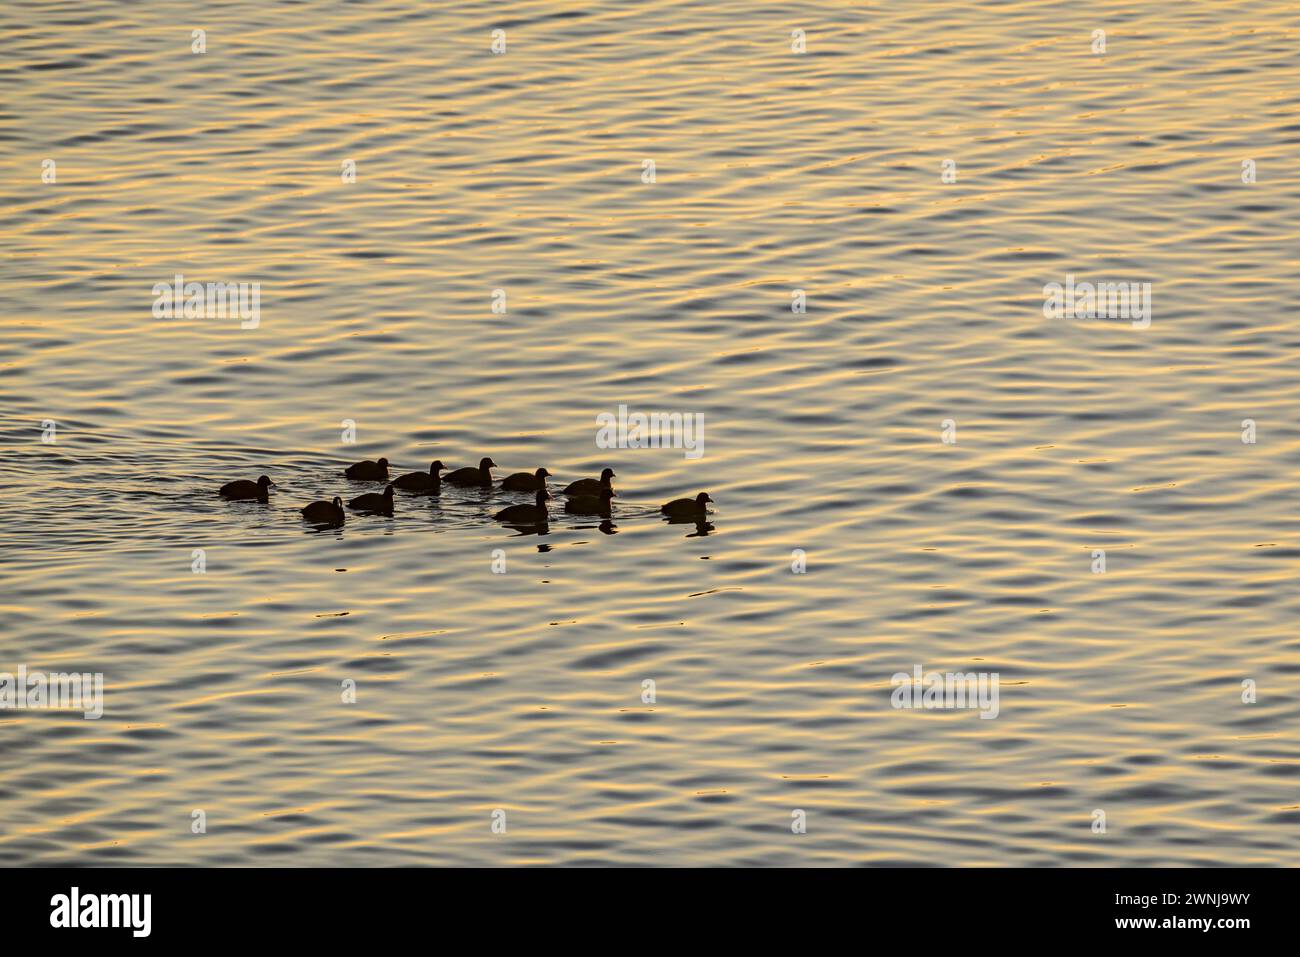 Some common coots (Fulica atra) at dawn in the Ebro river seen from the Zigurat viewpoint, at the mouth of the Ebro River (Tarragona, Catalonia Spain) Stock Photo